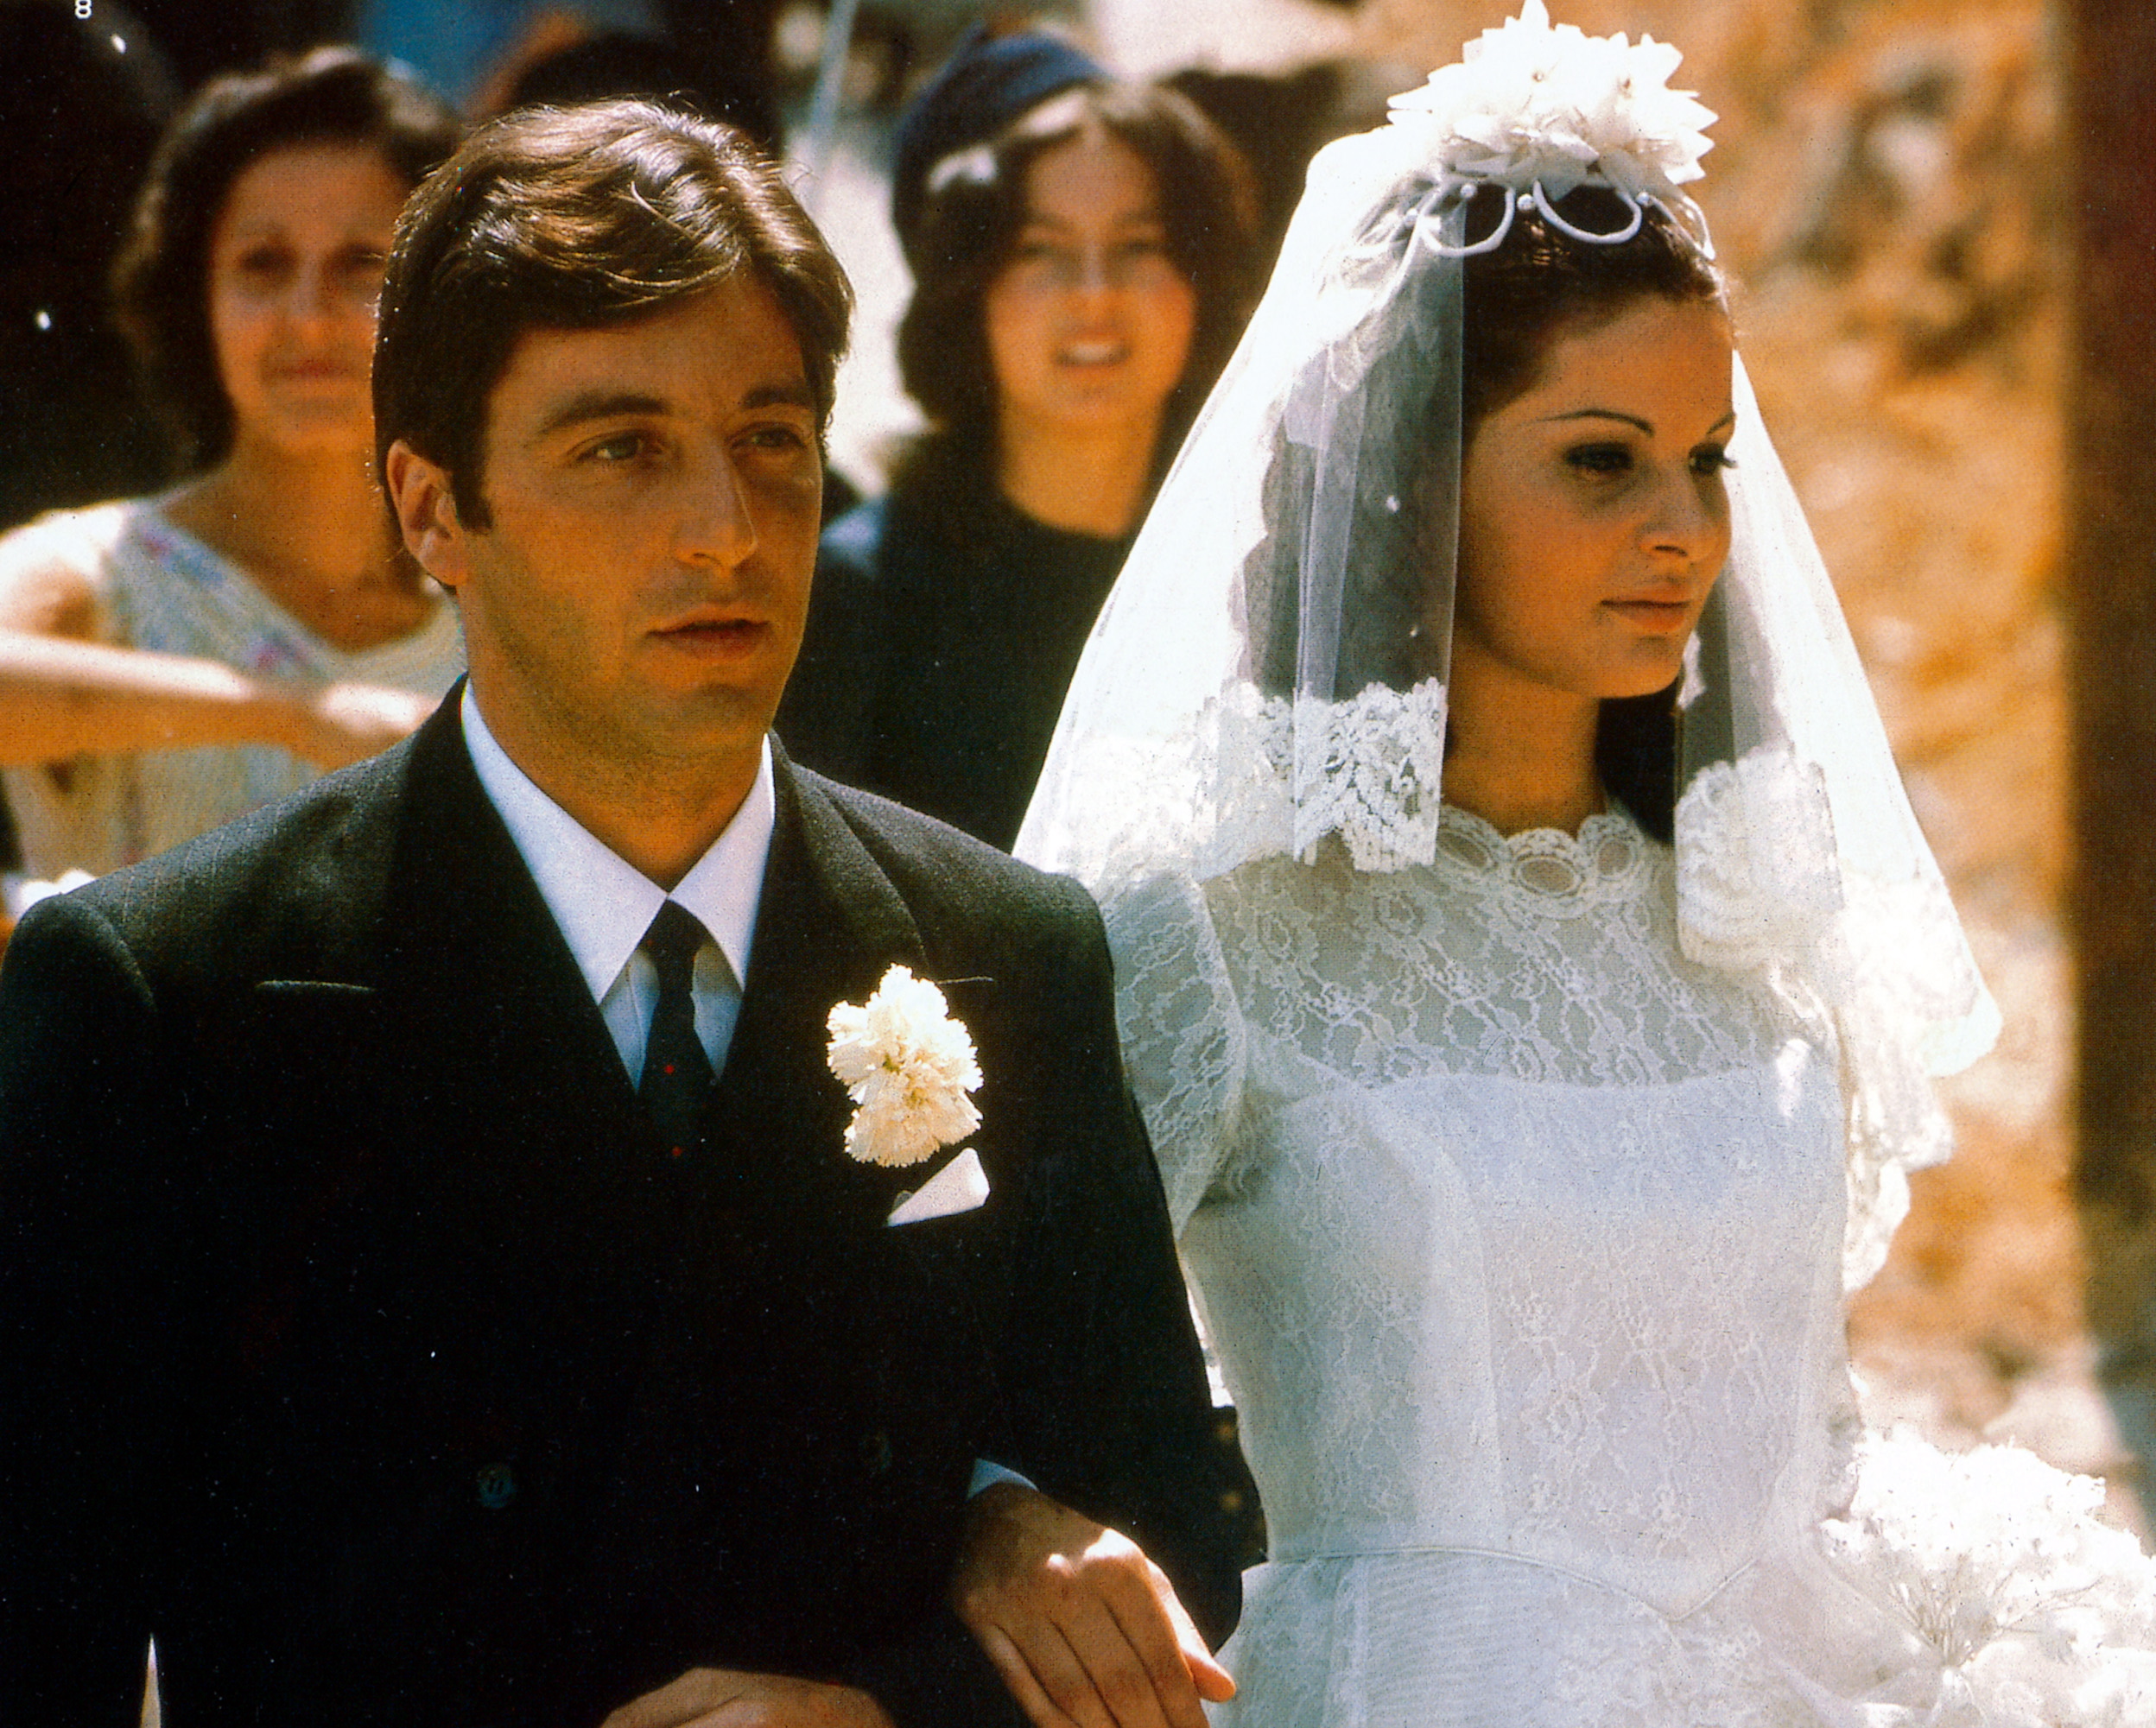 Al Pacino, US actor, in his wedding suit, and Simonetta Stefanelli, Italian actress, in her wedding dress on their wedding day in a publicity still issued for the film, 'The Godfather', Sicily, Italy, 1972 | Source: Getty Images